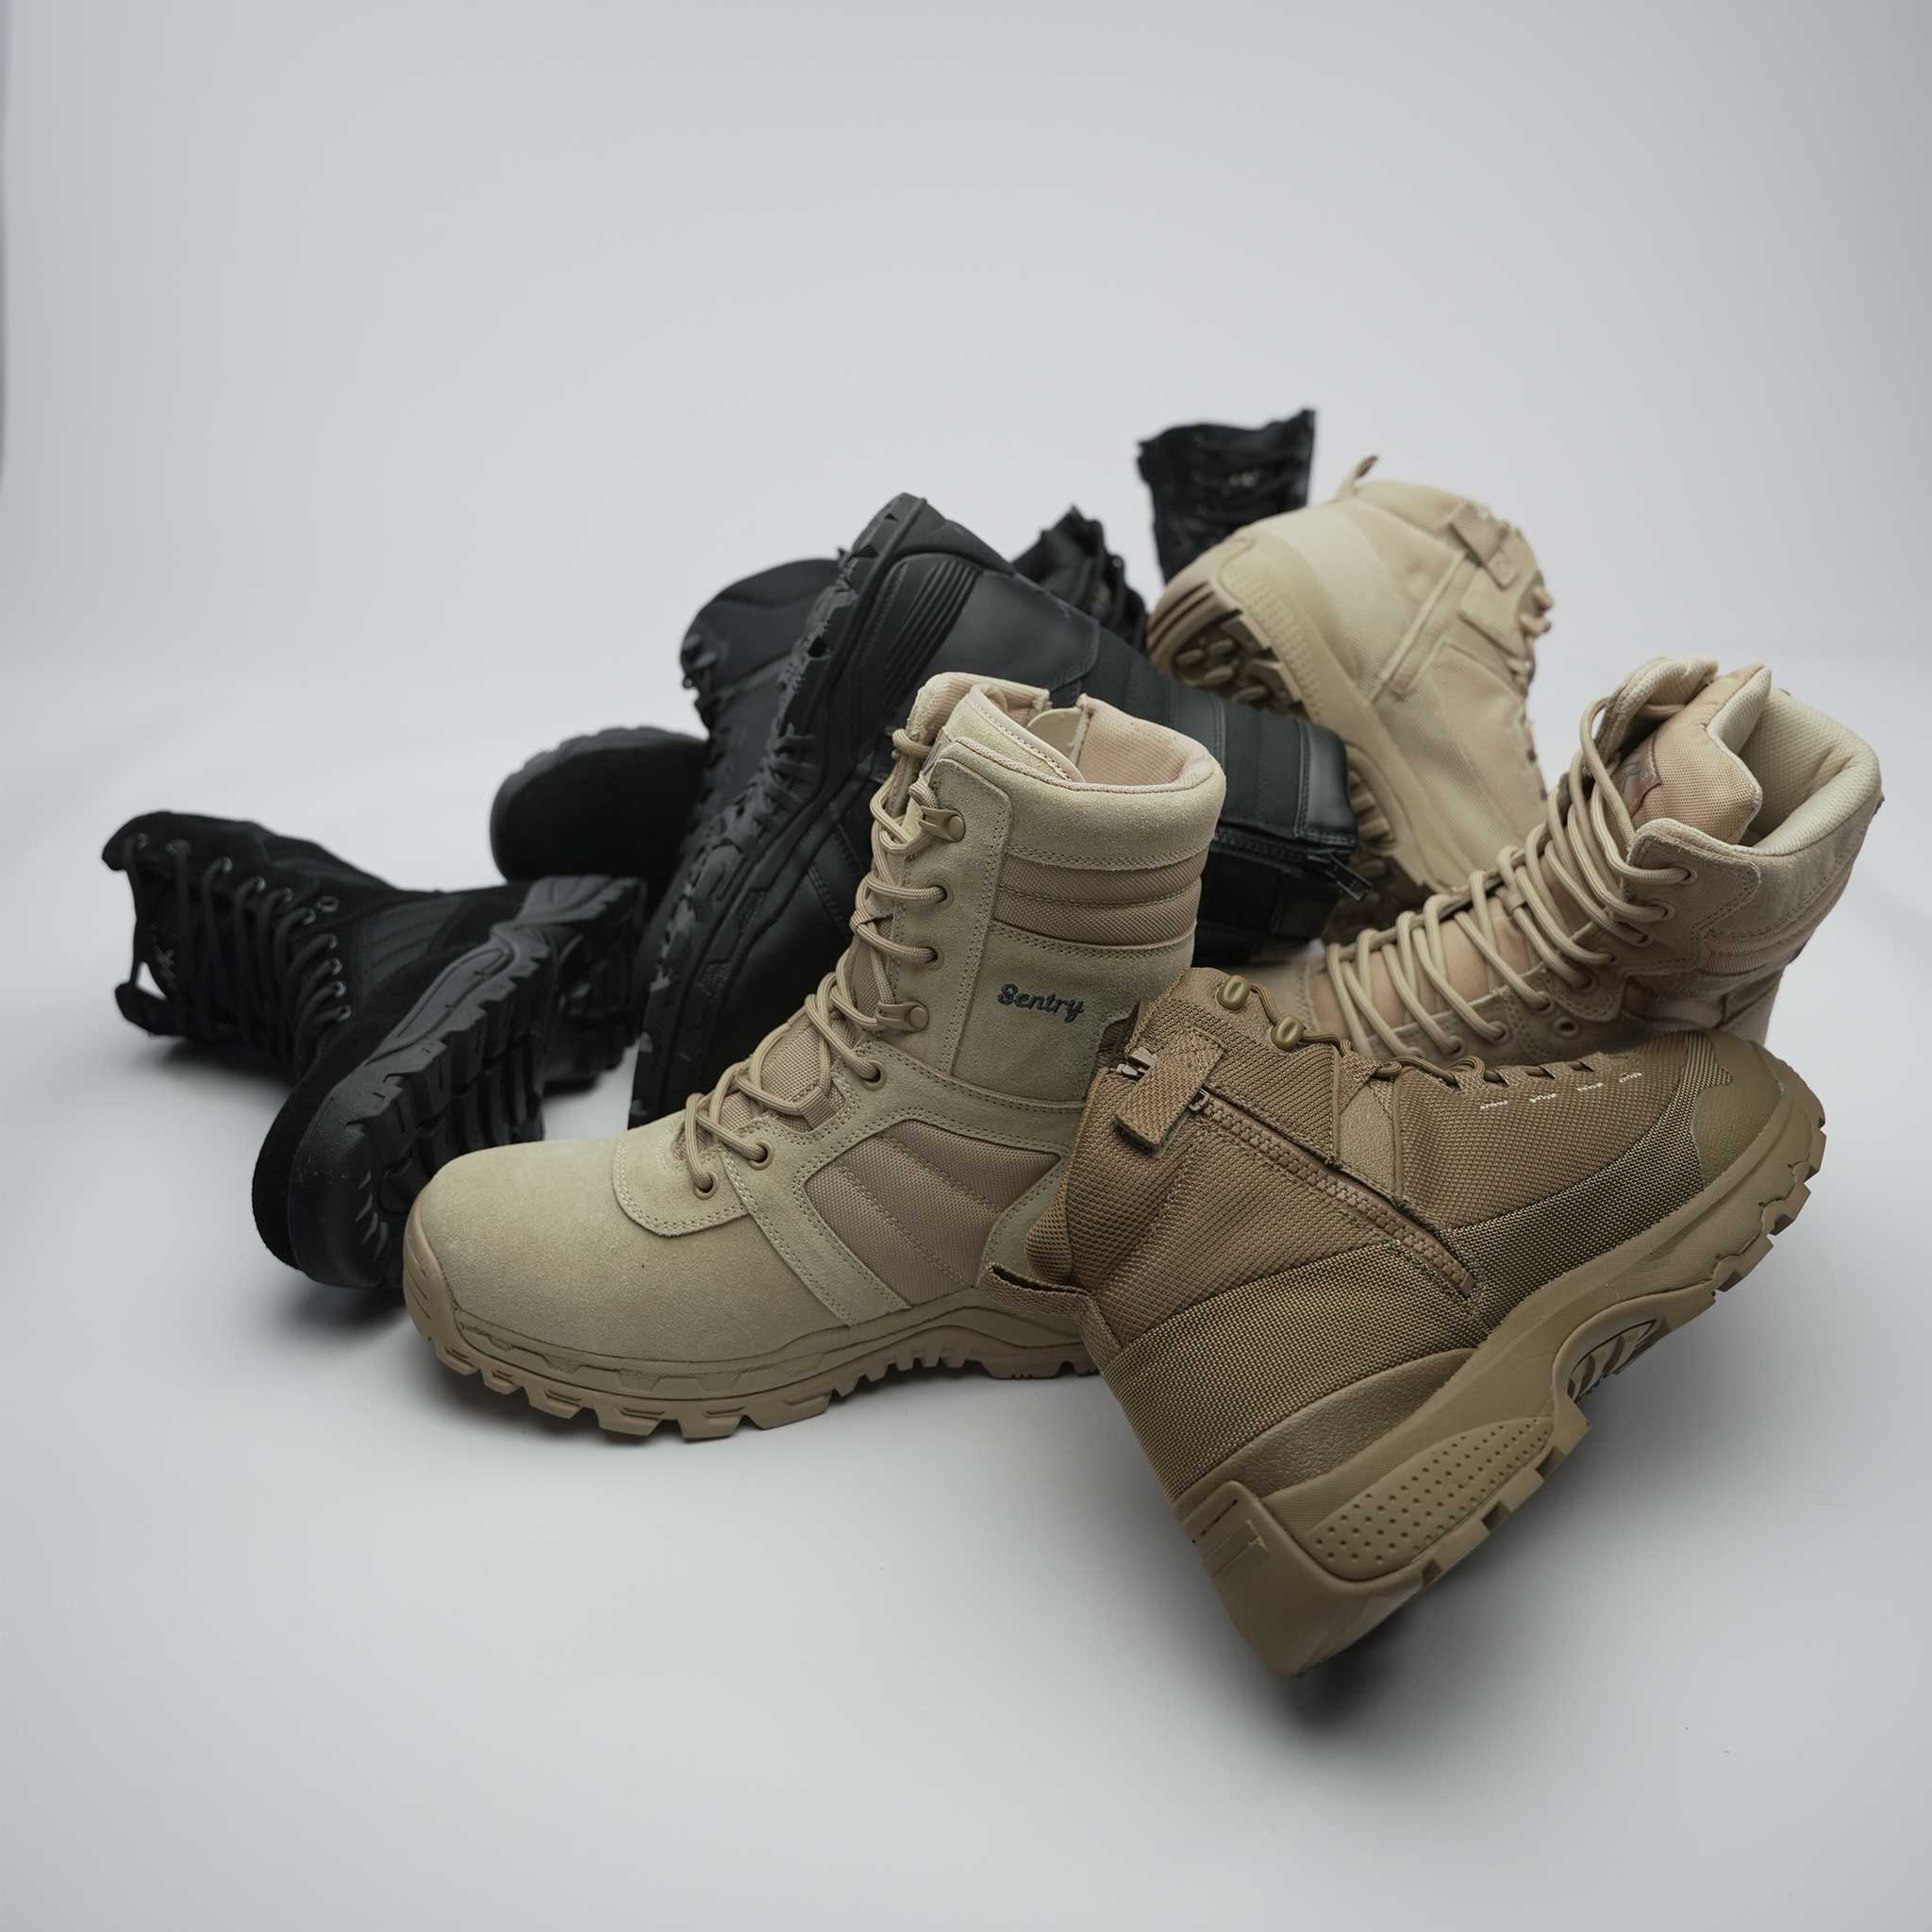 MAK boots military and combat boot collection